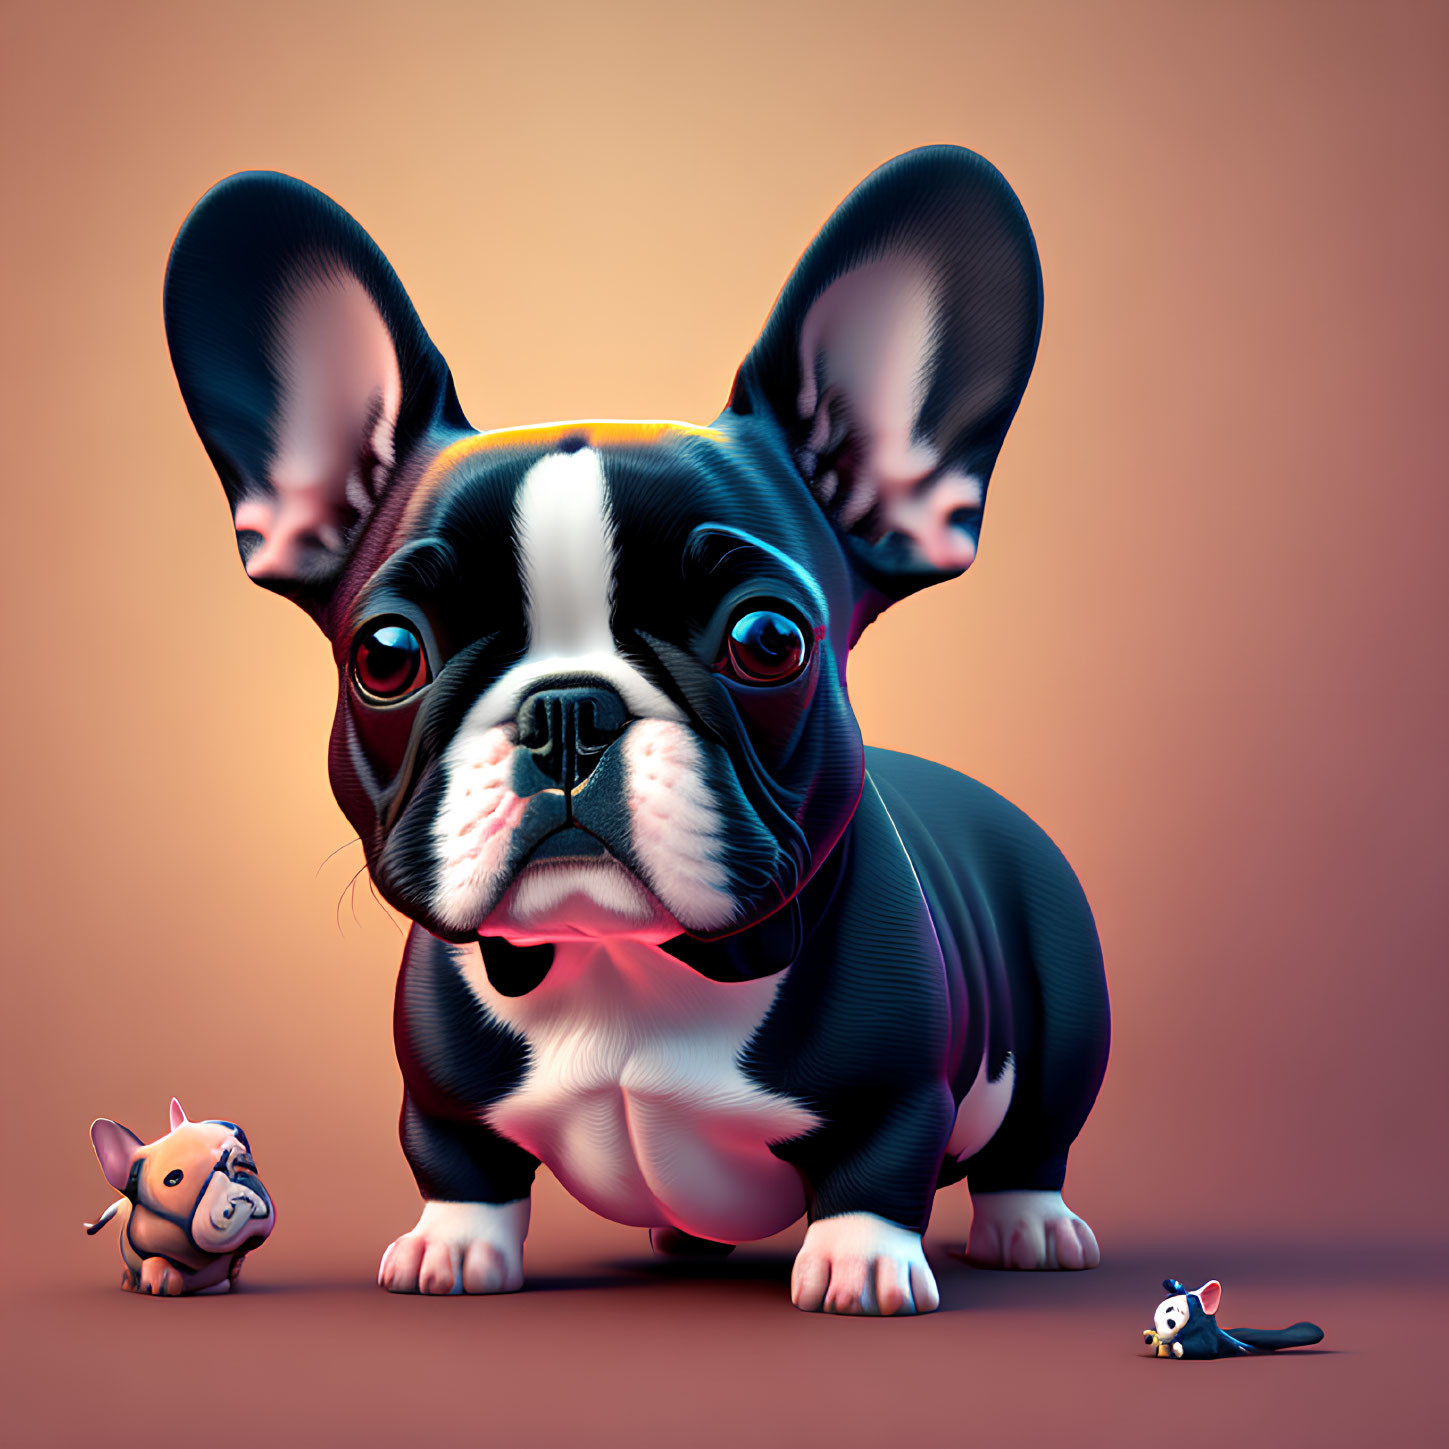 Stylized digital illustration of French Bulldog with exaggerated features, pig, and mouse